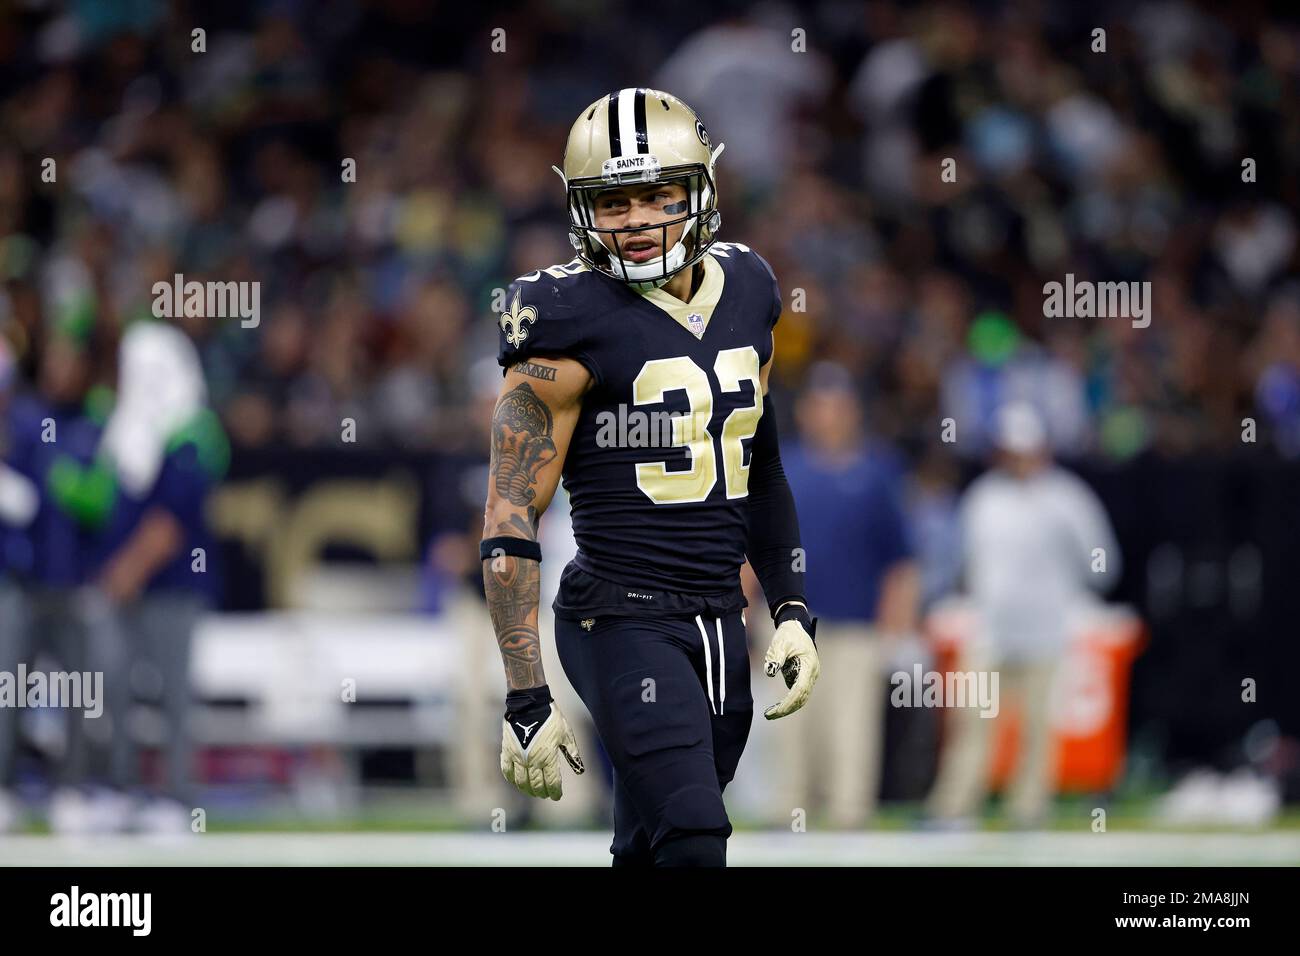 New Orleans Saints safety Tyrann Mathieu (32) in action during an